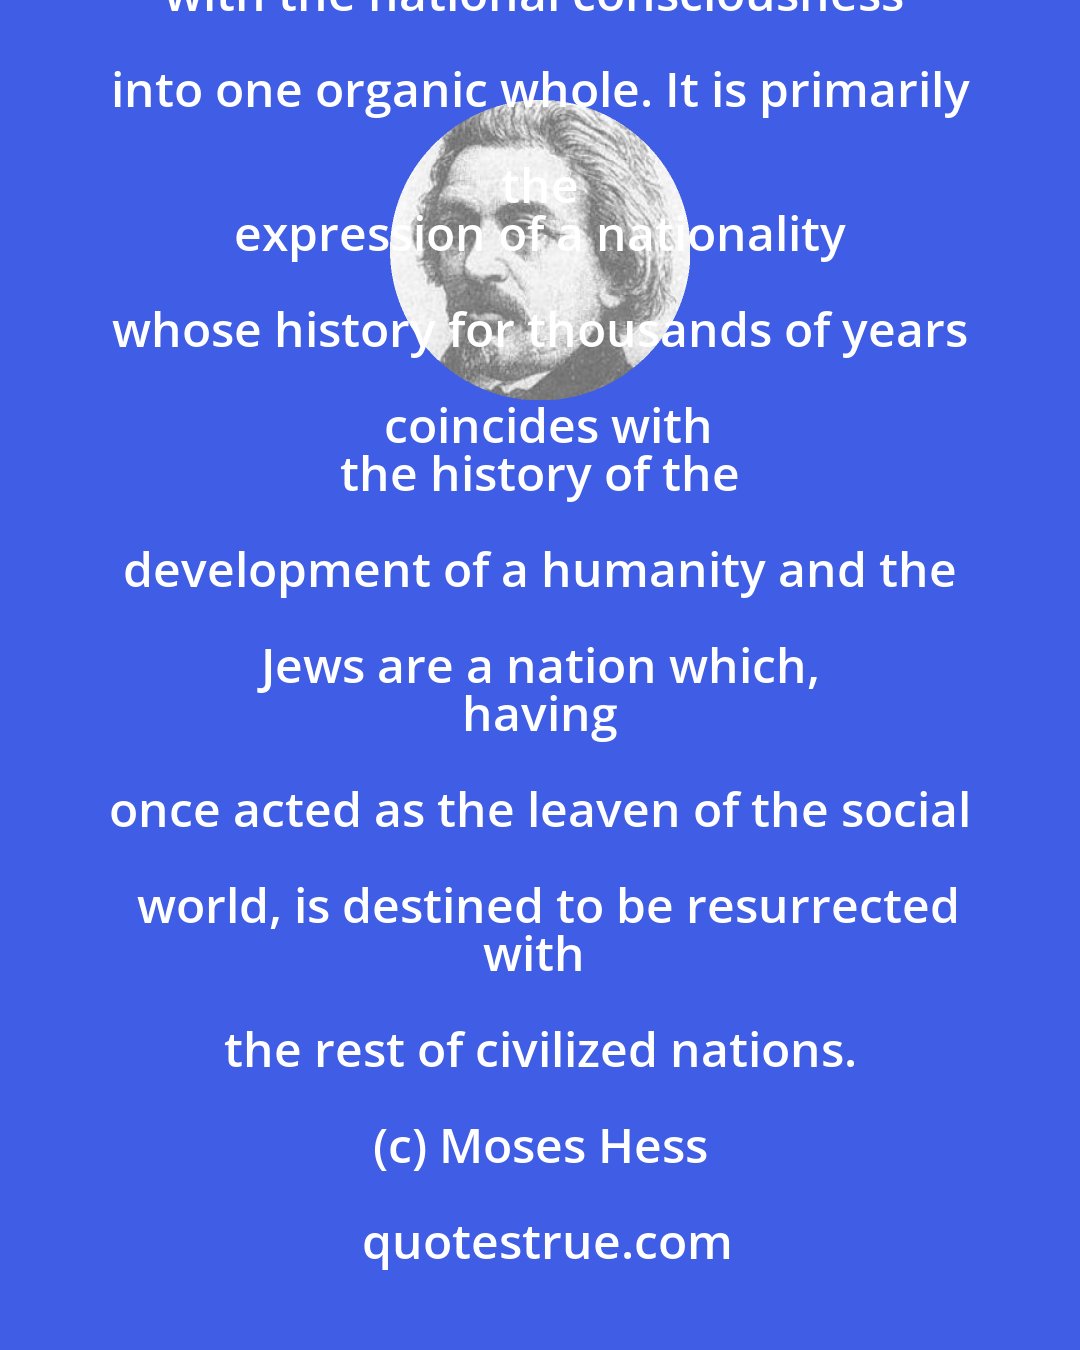 Moses Hess: Judaism is not a passive religion, but an active life factor which has coalesced
with the national consciousness into one organic whole. It is primarily the 
 expression of a nationality whose history for thousands of years coincides with
 the history of the development of a humanity and the Jews are a nation which, 
 having once acted as the leaven of the social world, is destined to be resurrected
with the rest of civilized nations.